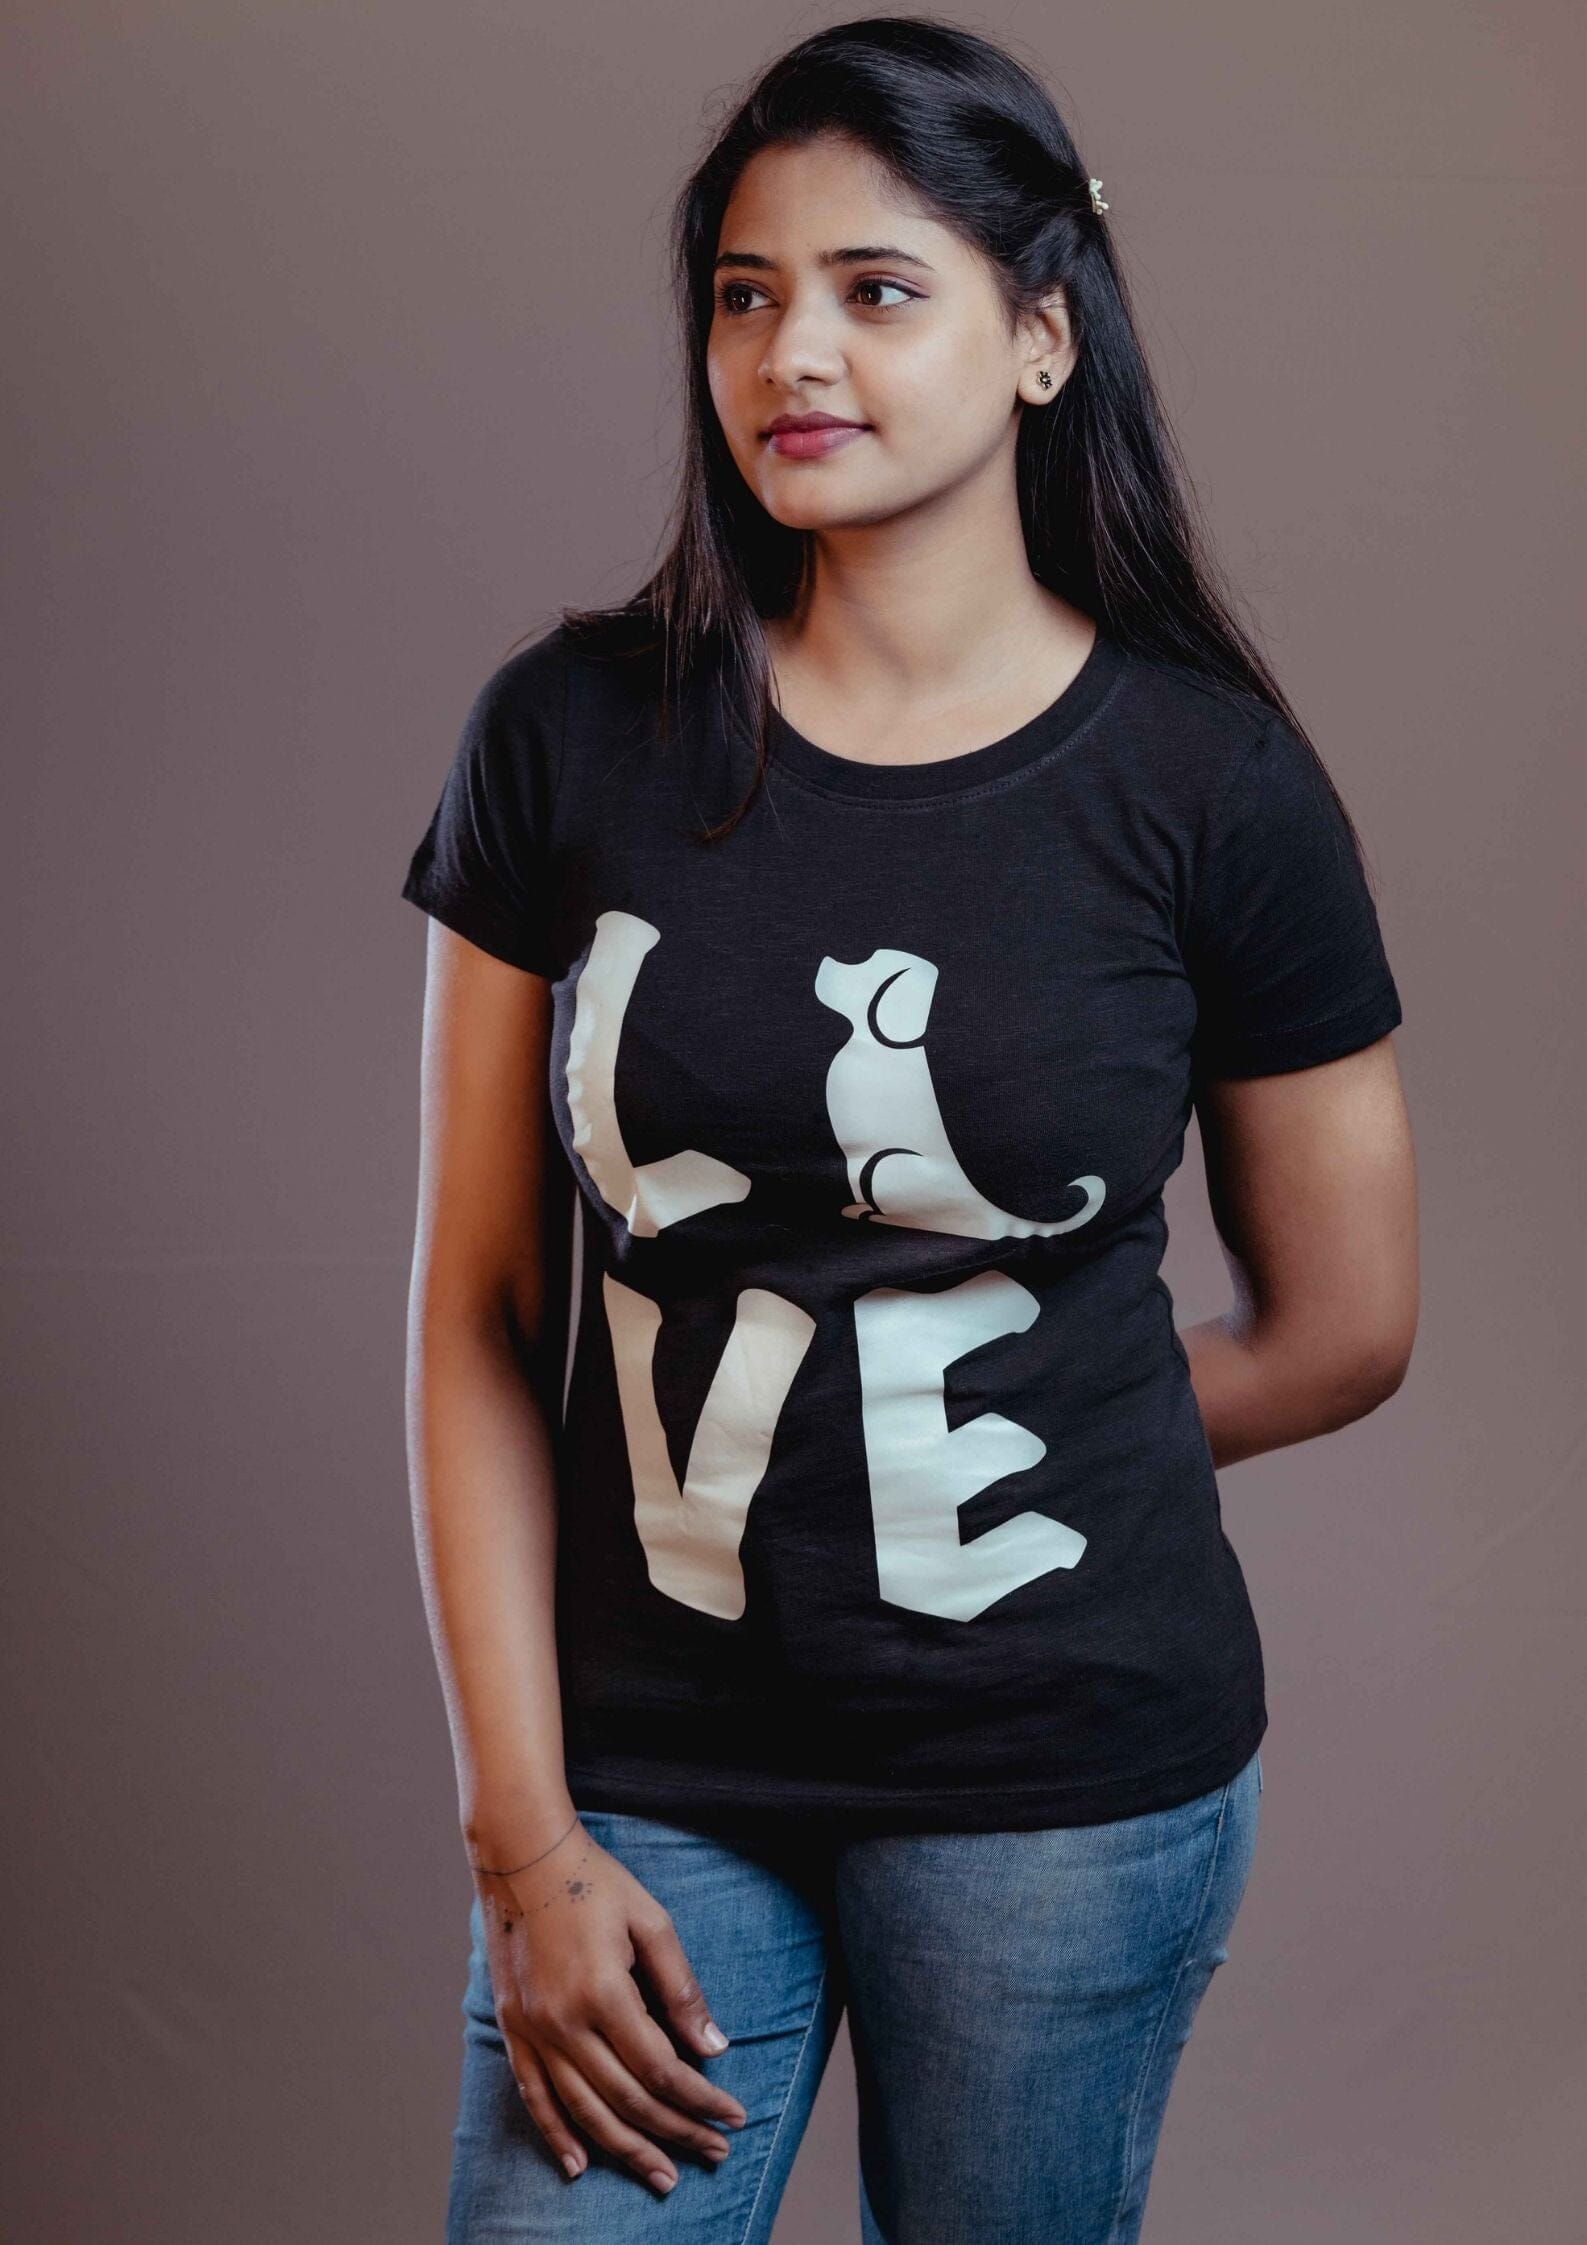 LOVE T-Shirt Shirts & Tops ThePetPeopleCafe XSmall 